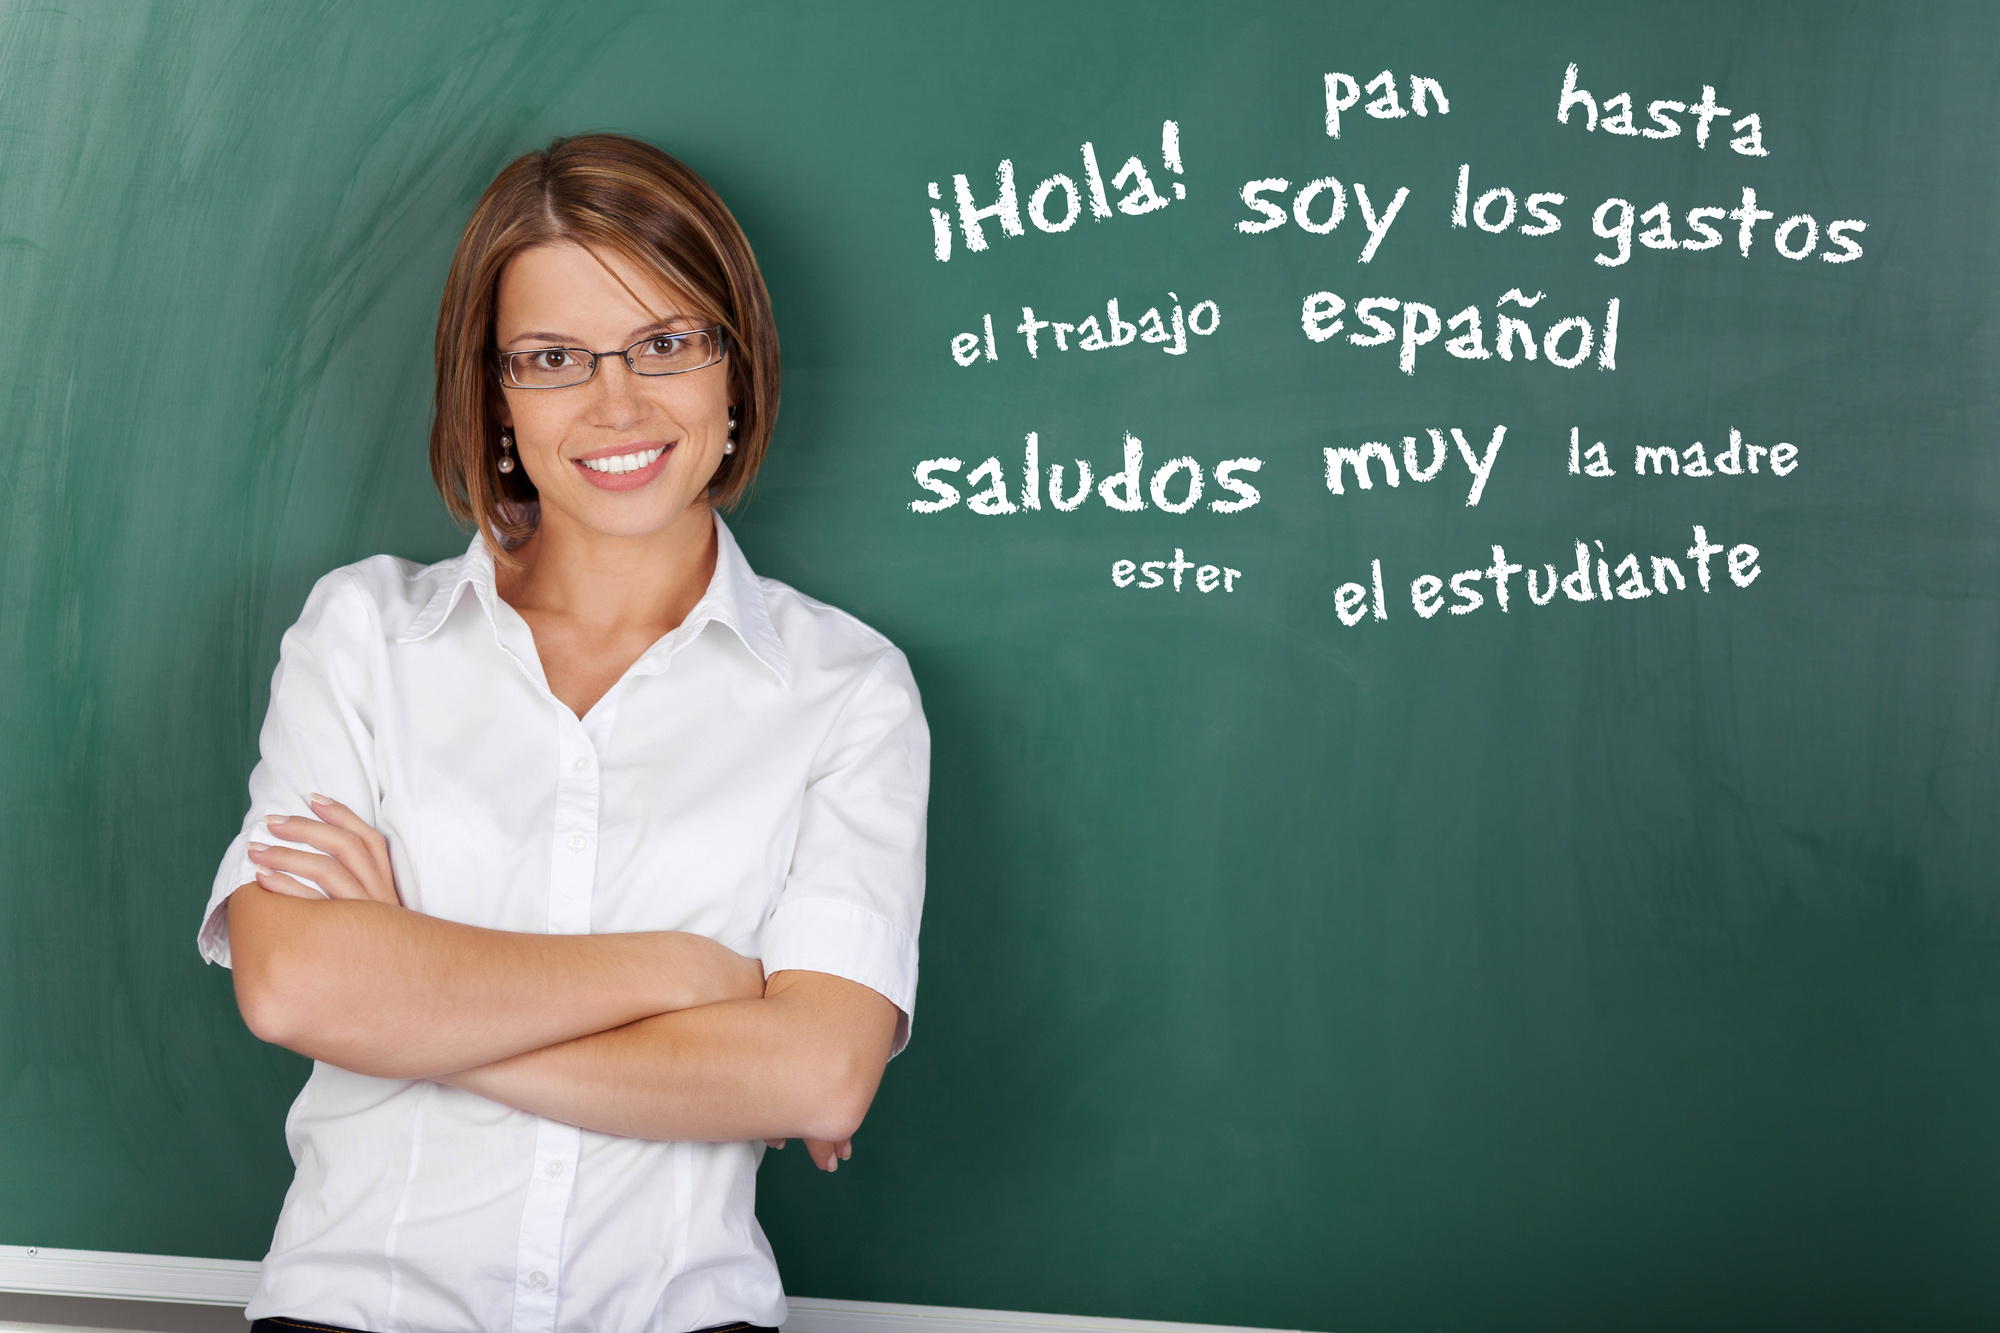 give a speech in english and spanish